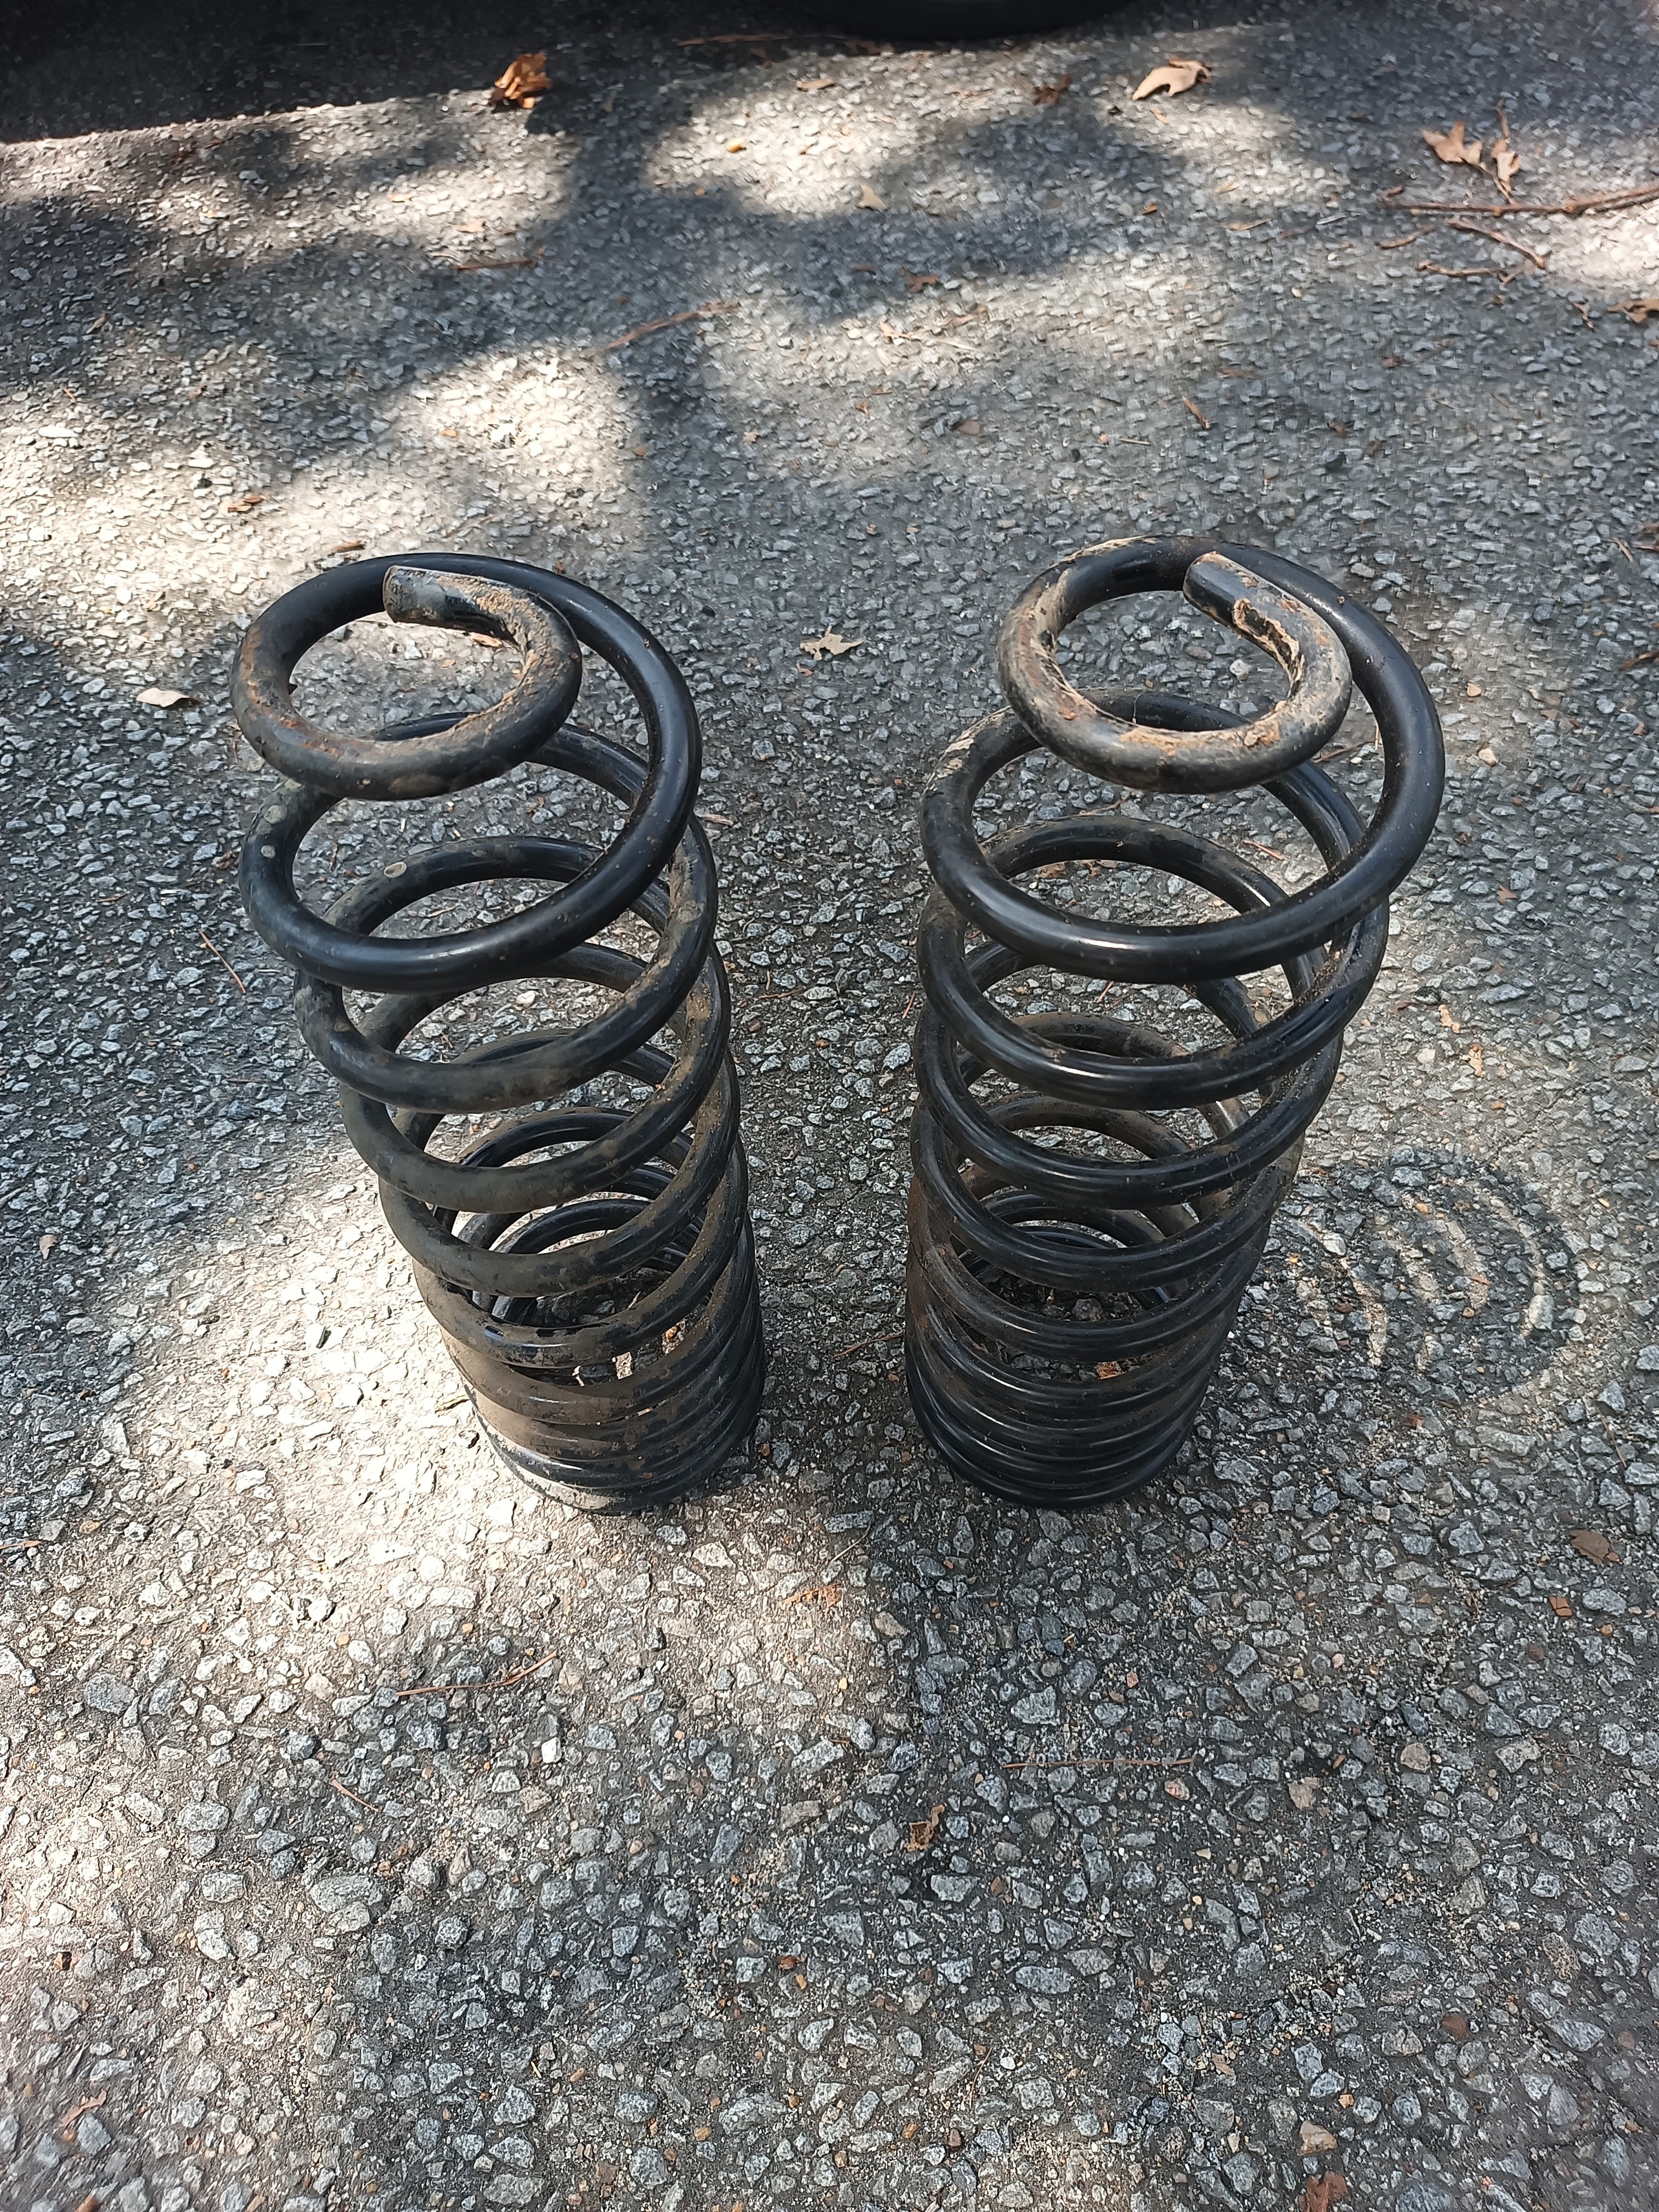 Volvo 240 Wagon Rear Springs Used FREE SHIPPING